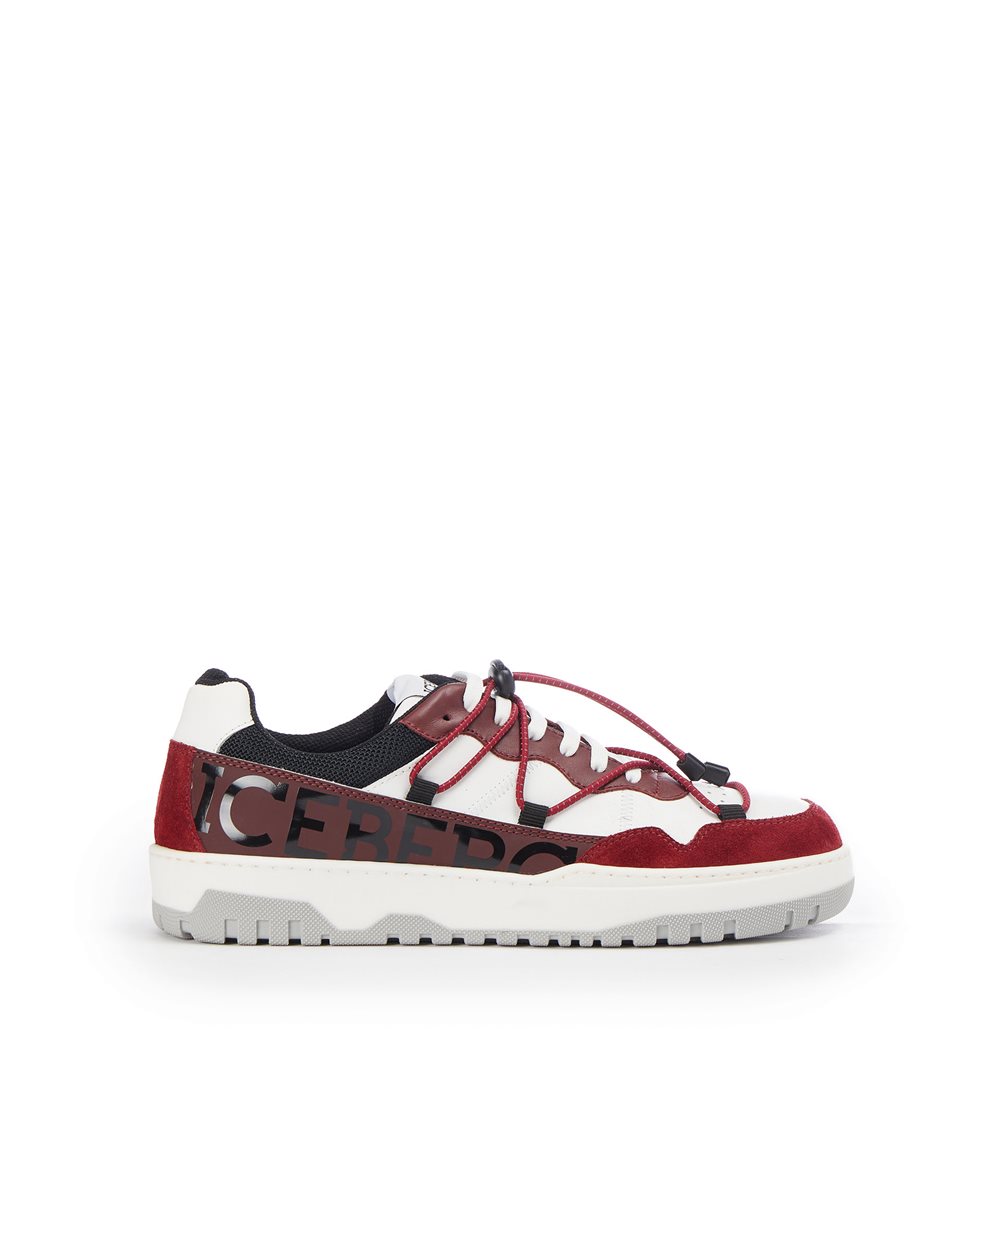 Nabuk and leather Okoro sneakers - Shoes & sneakers | Iceberg - Official Website